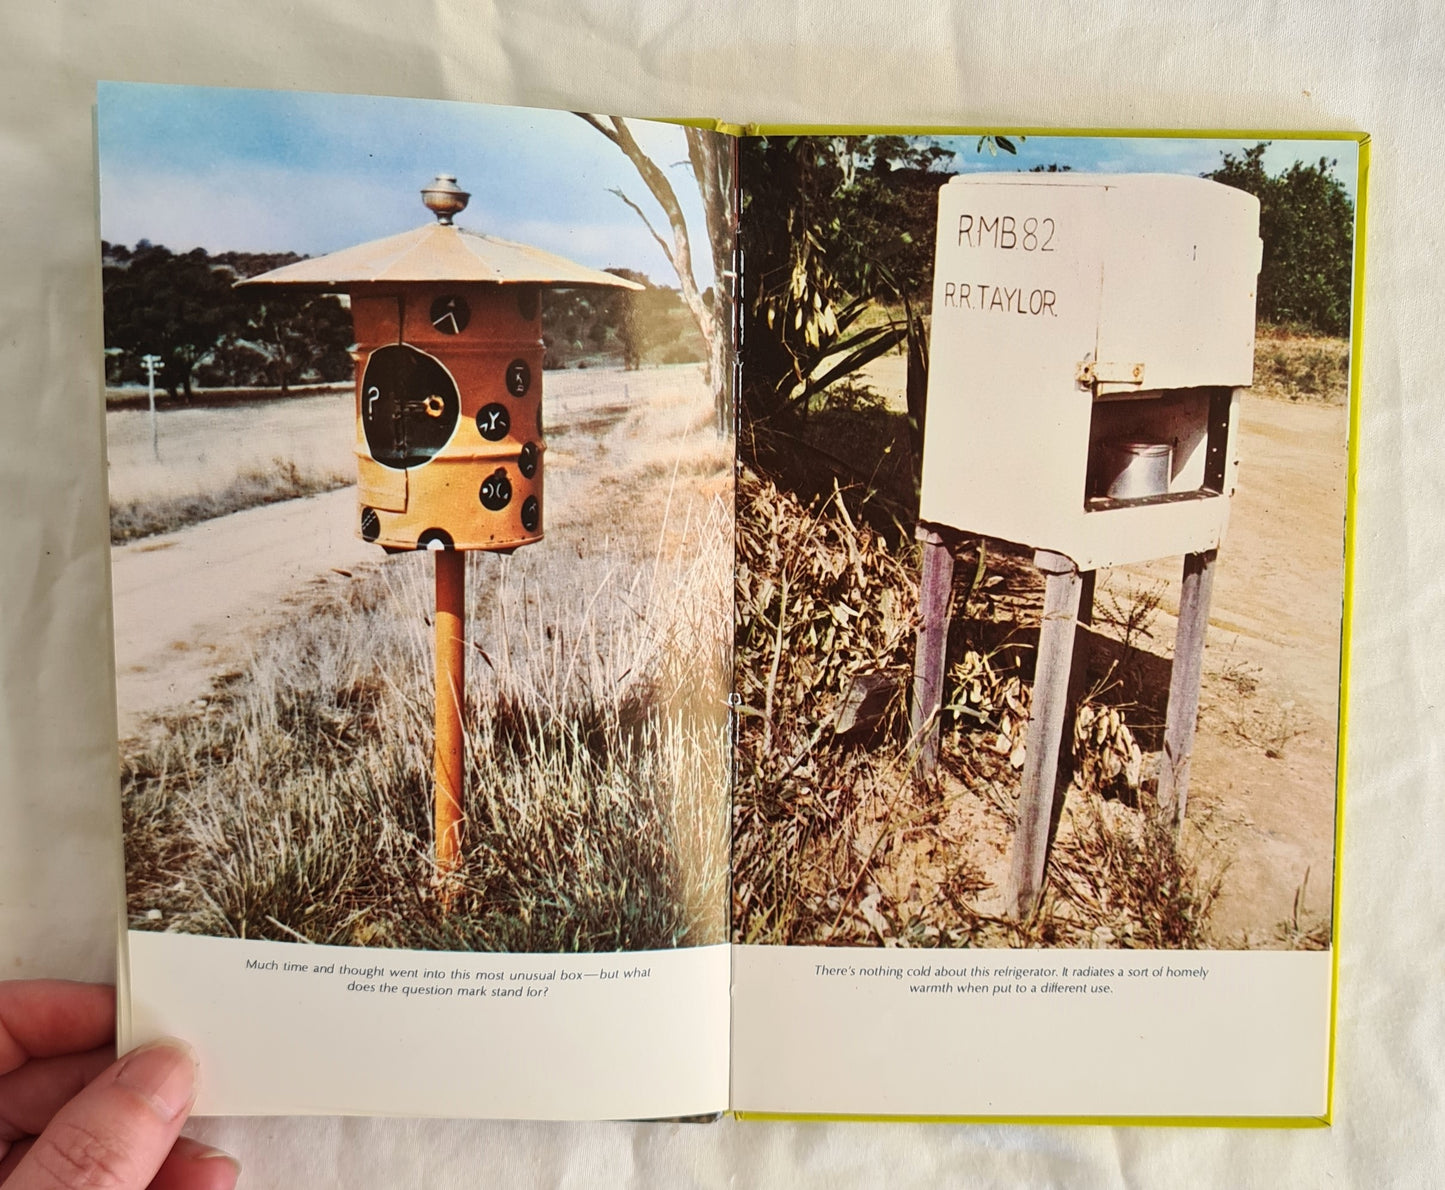 Australian Country Mail Boxes by Hans J. Breitgraf